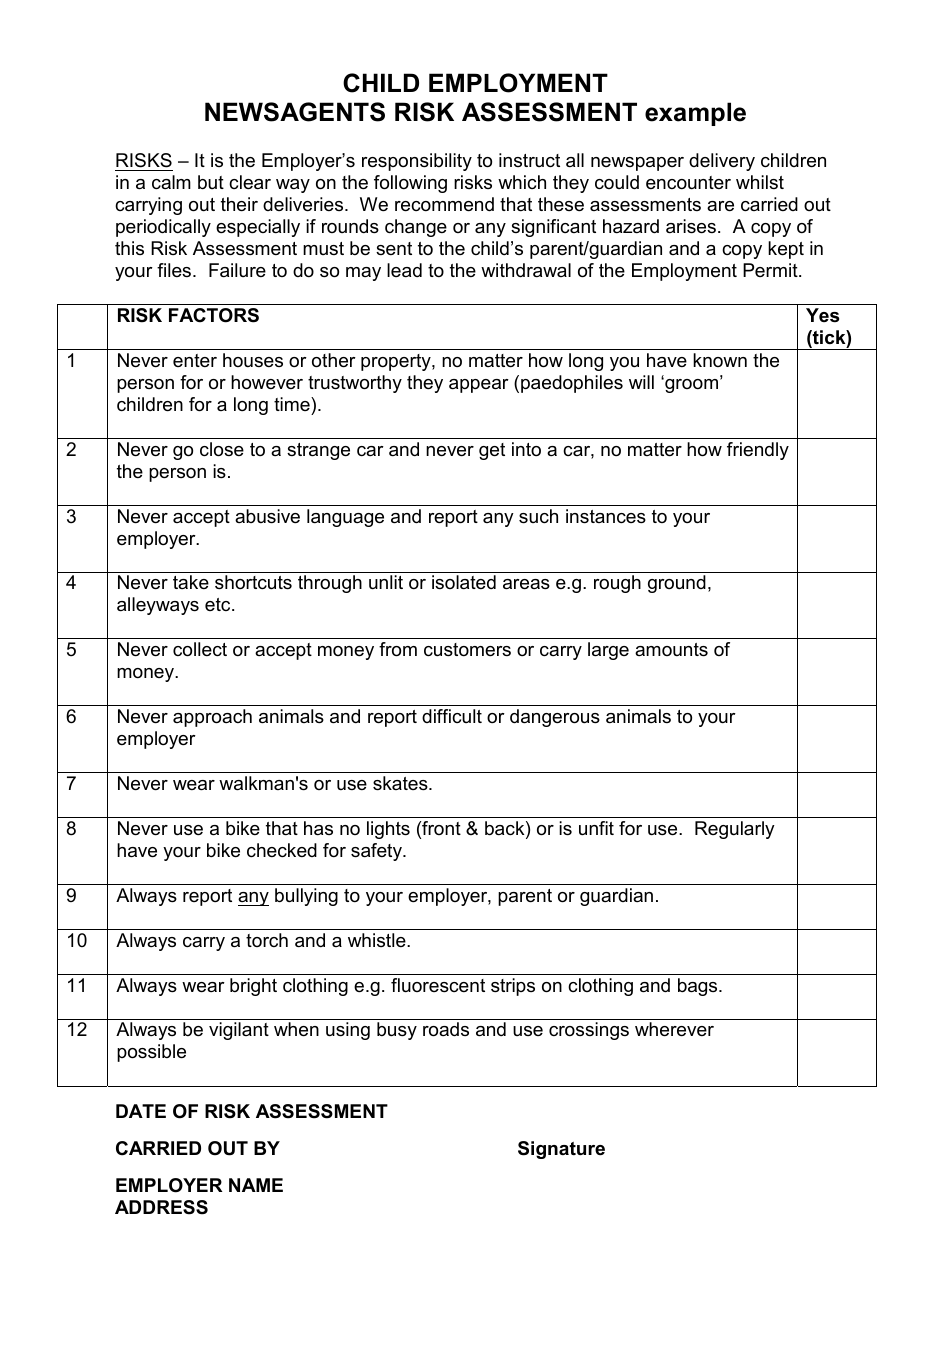 Child Employment Newsagent's Risk Assessment Template - Preview Image